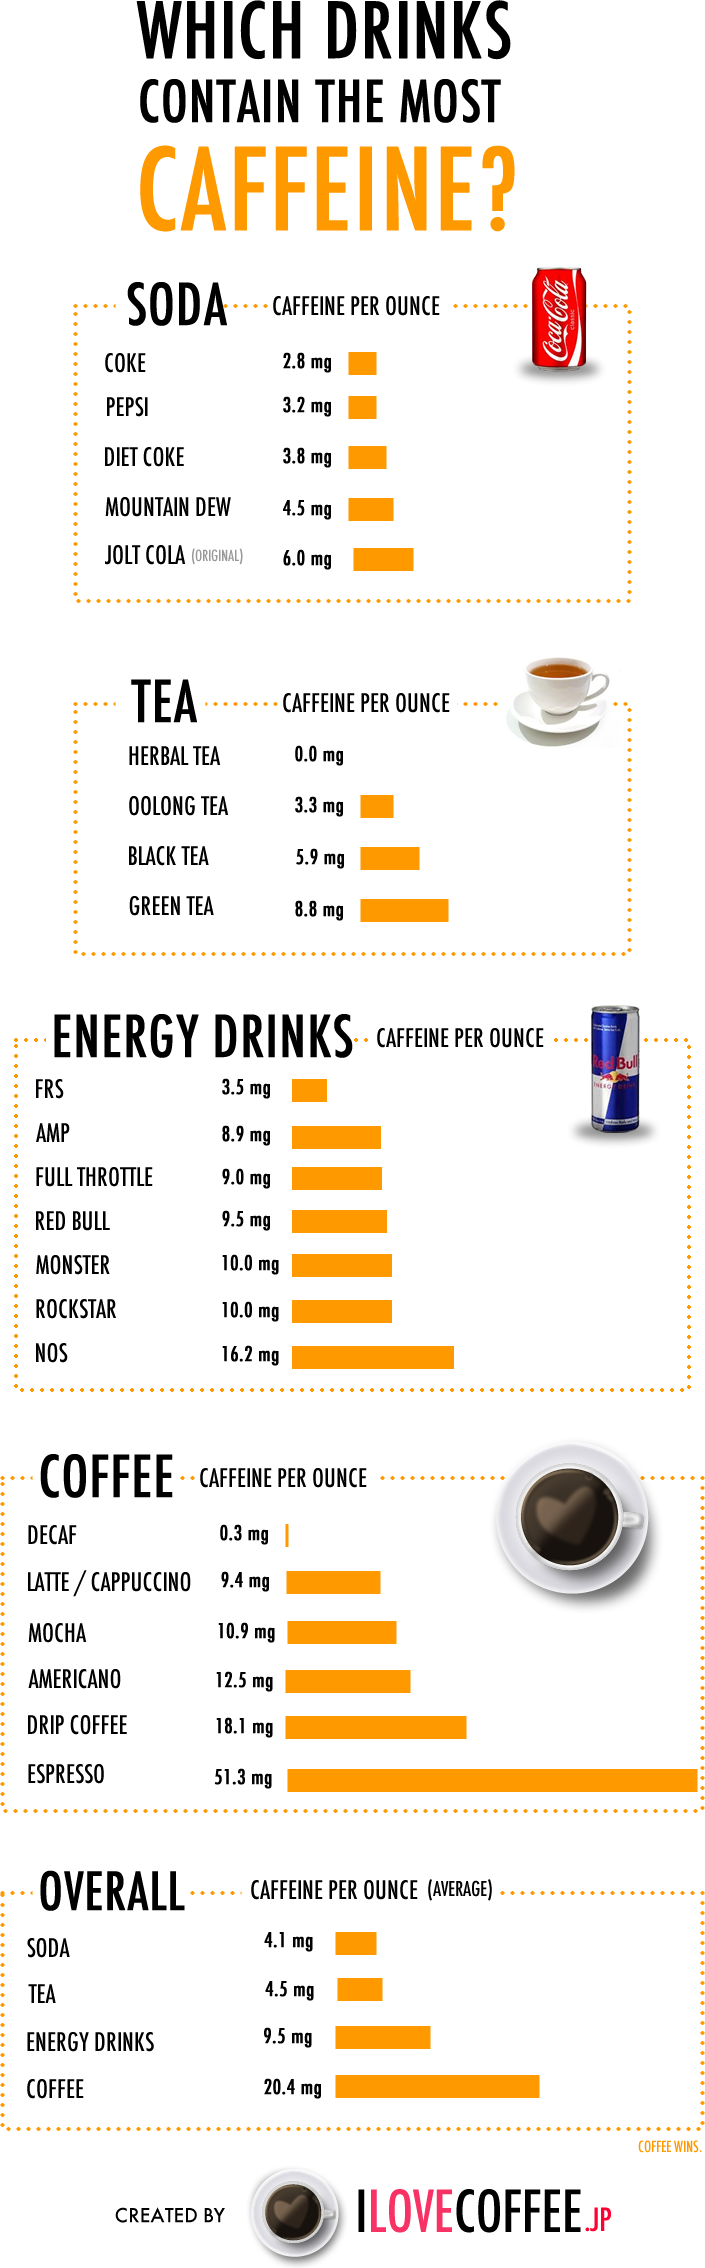 Which drinks contain the most caffeine?